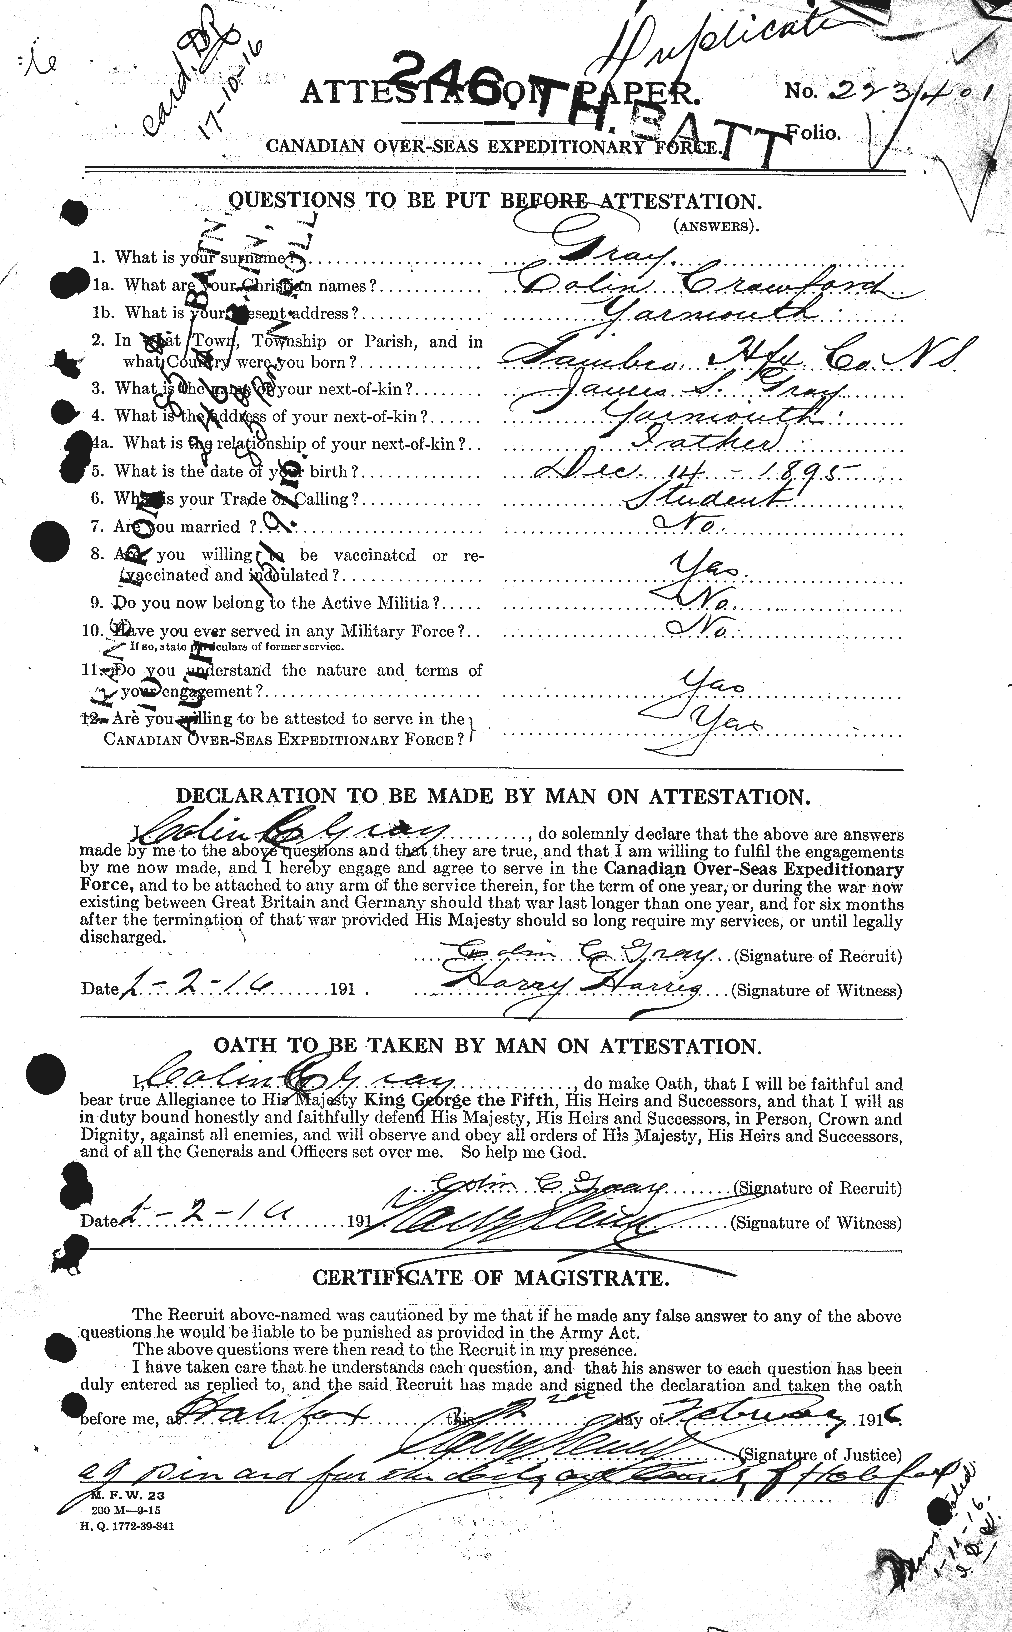 Personnel Records of the First World War - CEF 361460a